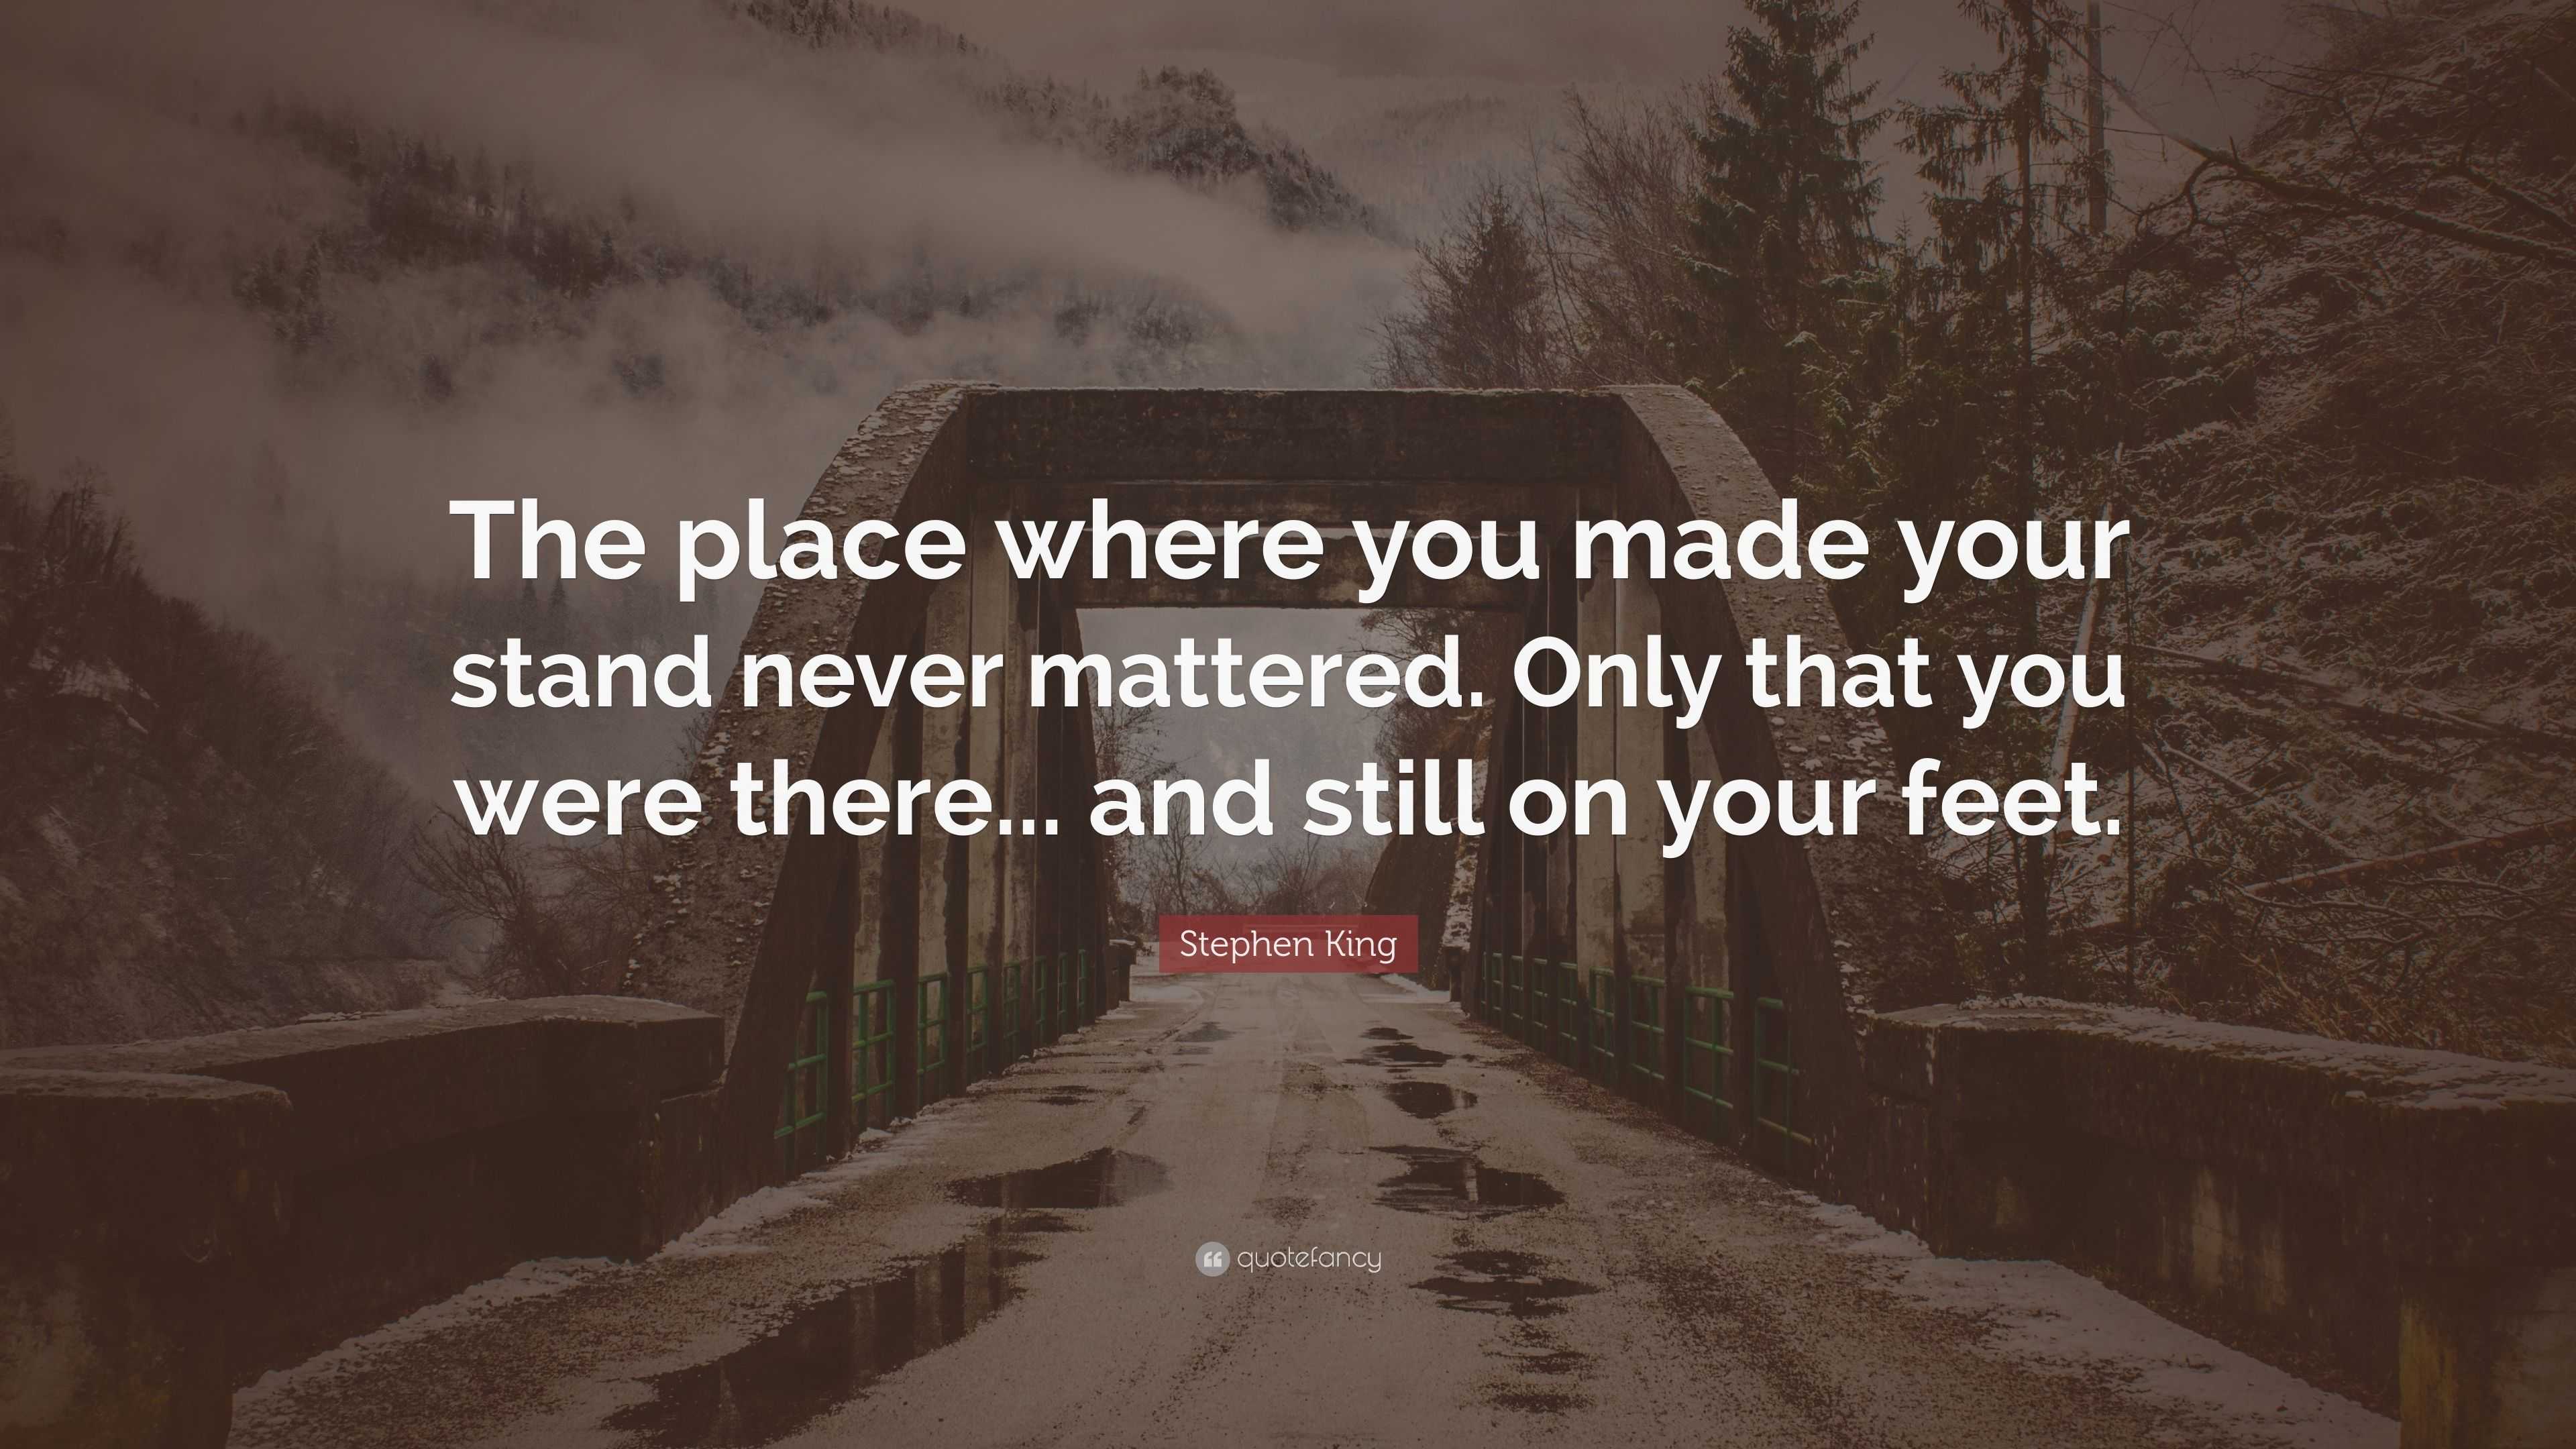 Stephen King Quote: “The place where you made your stand never mattered